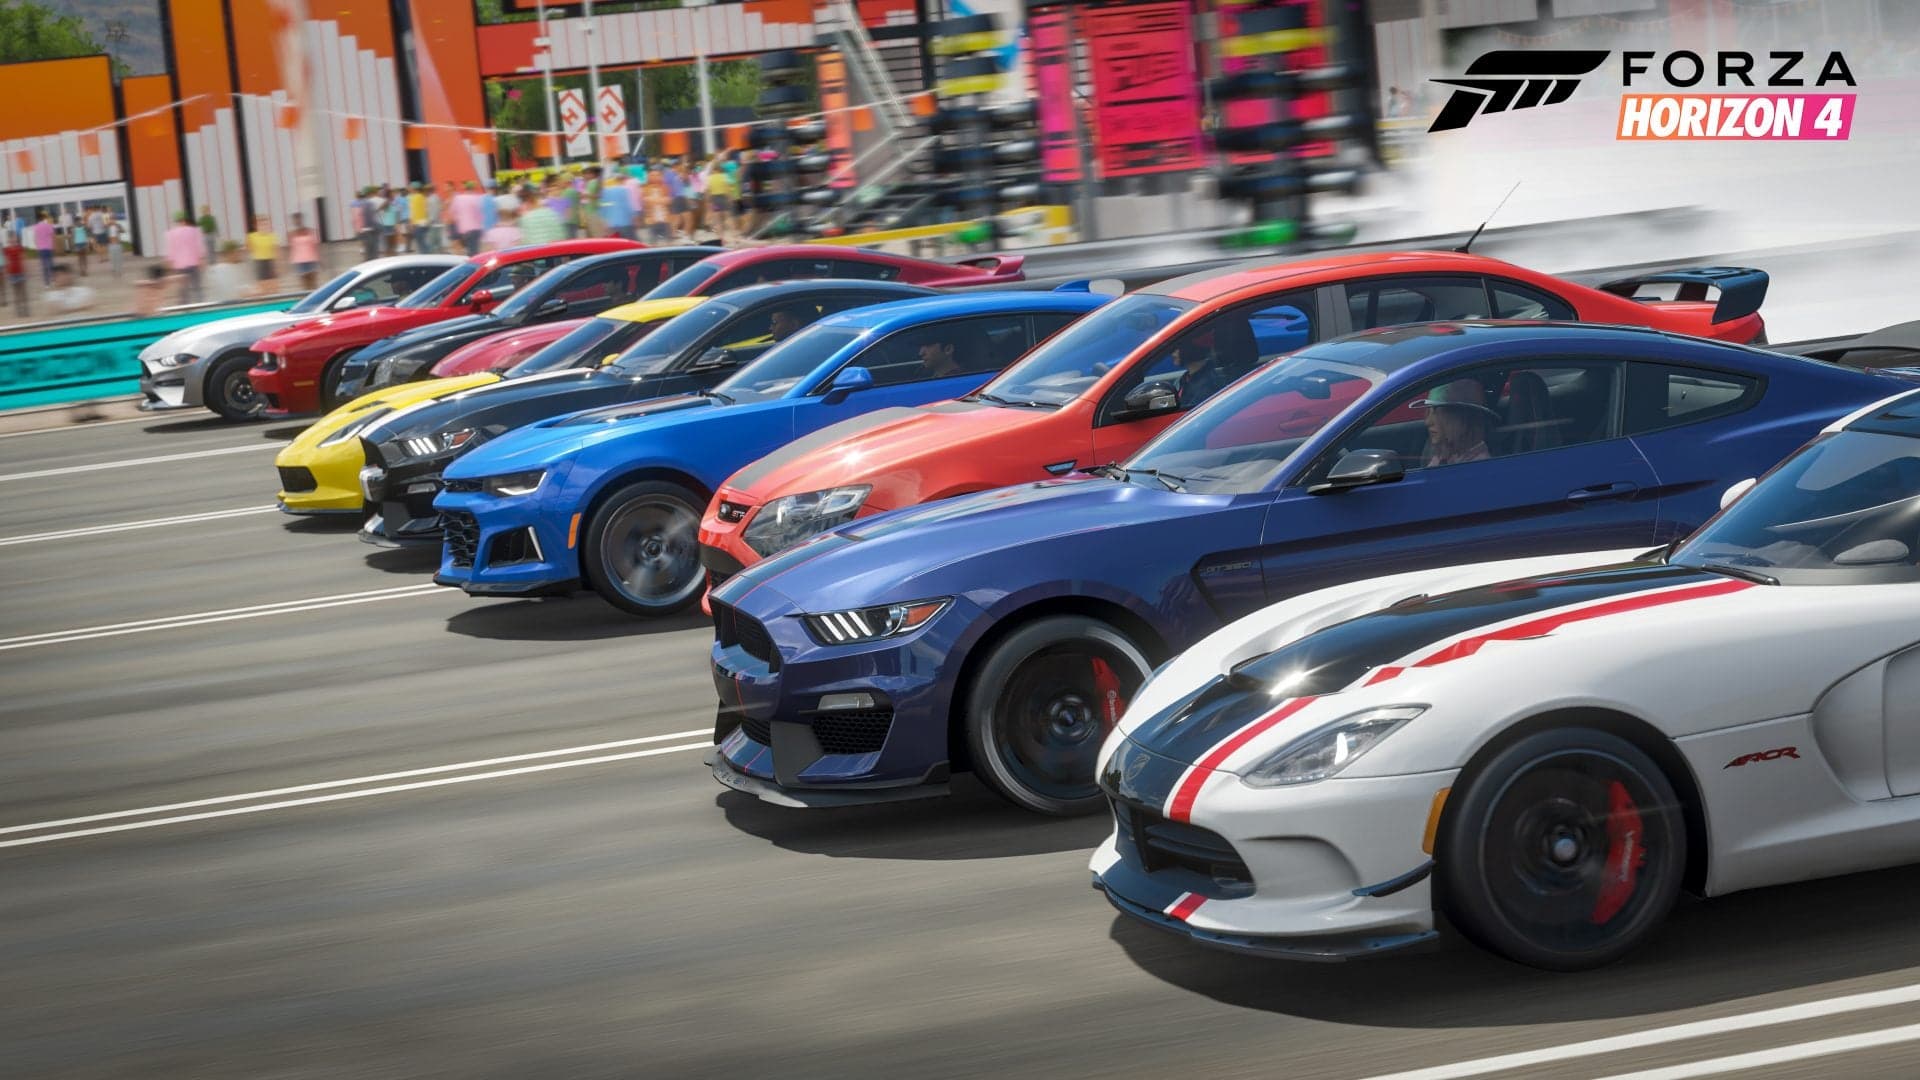 There Might Not Be a New Forza Game in 2019